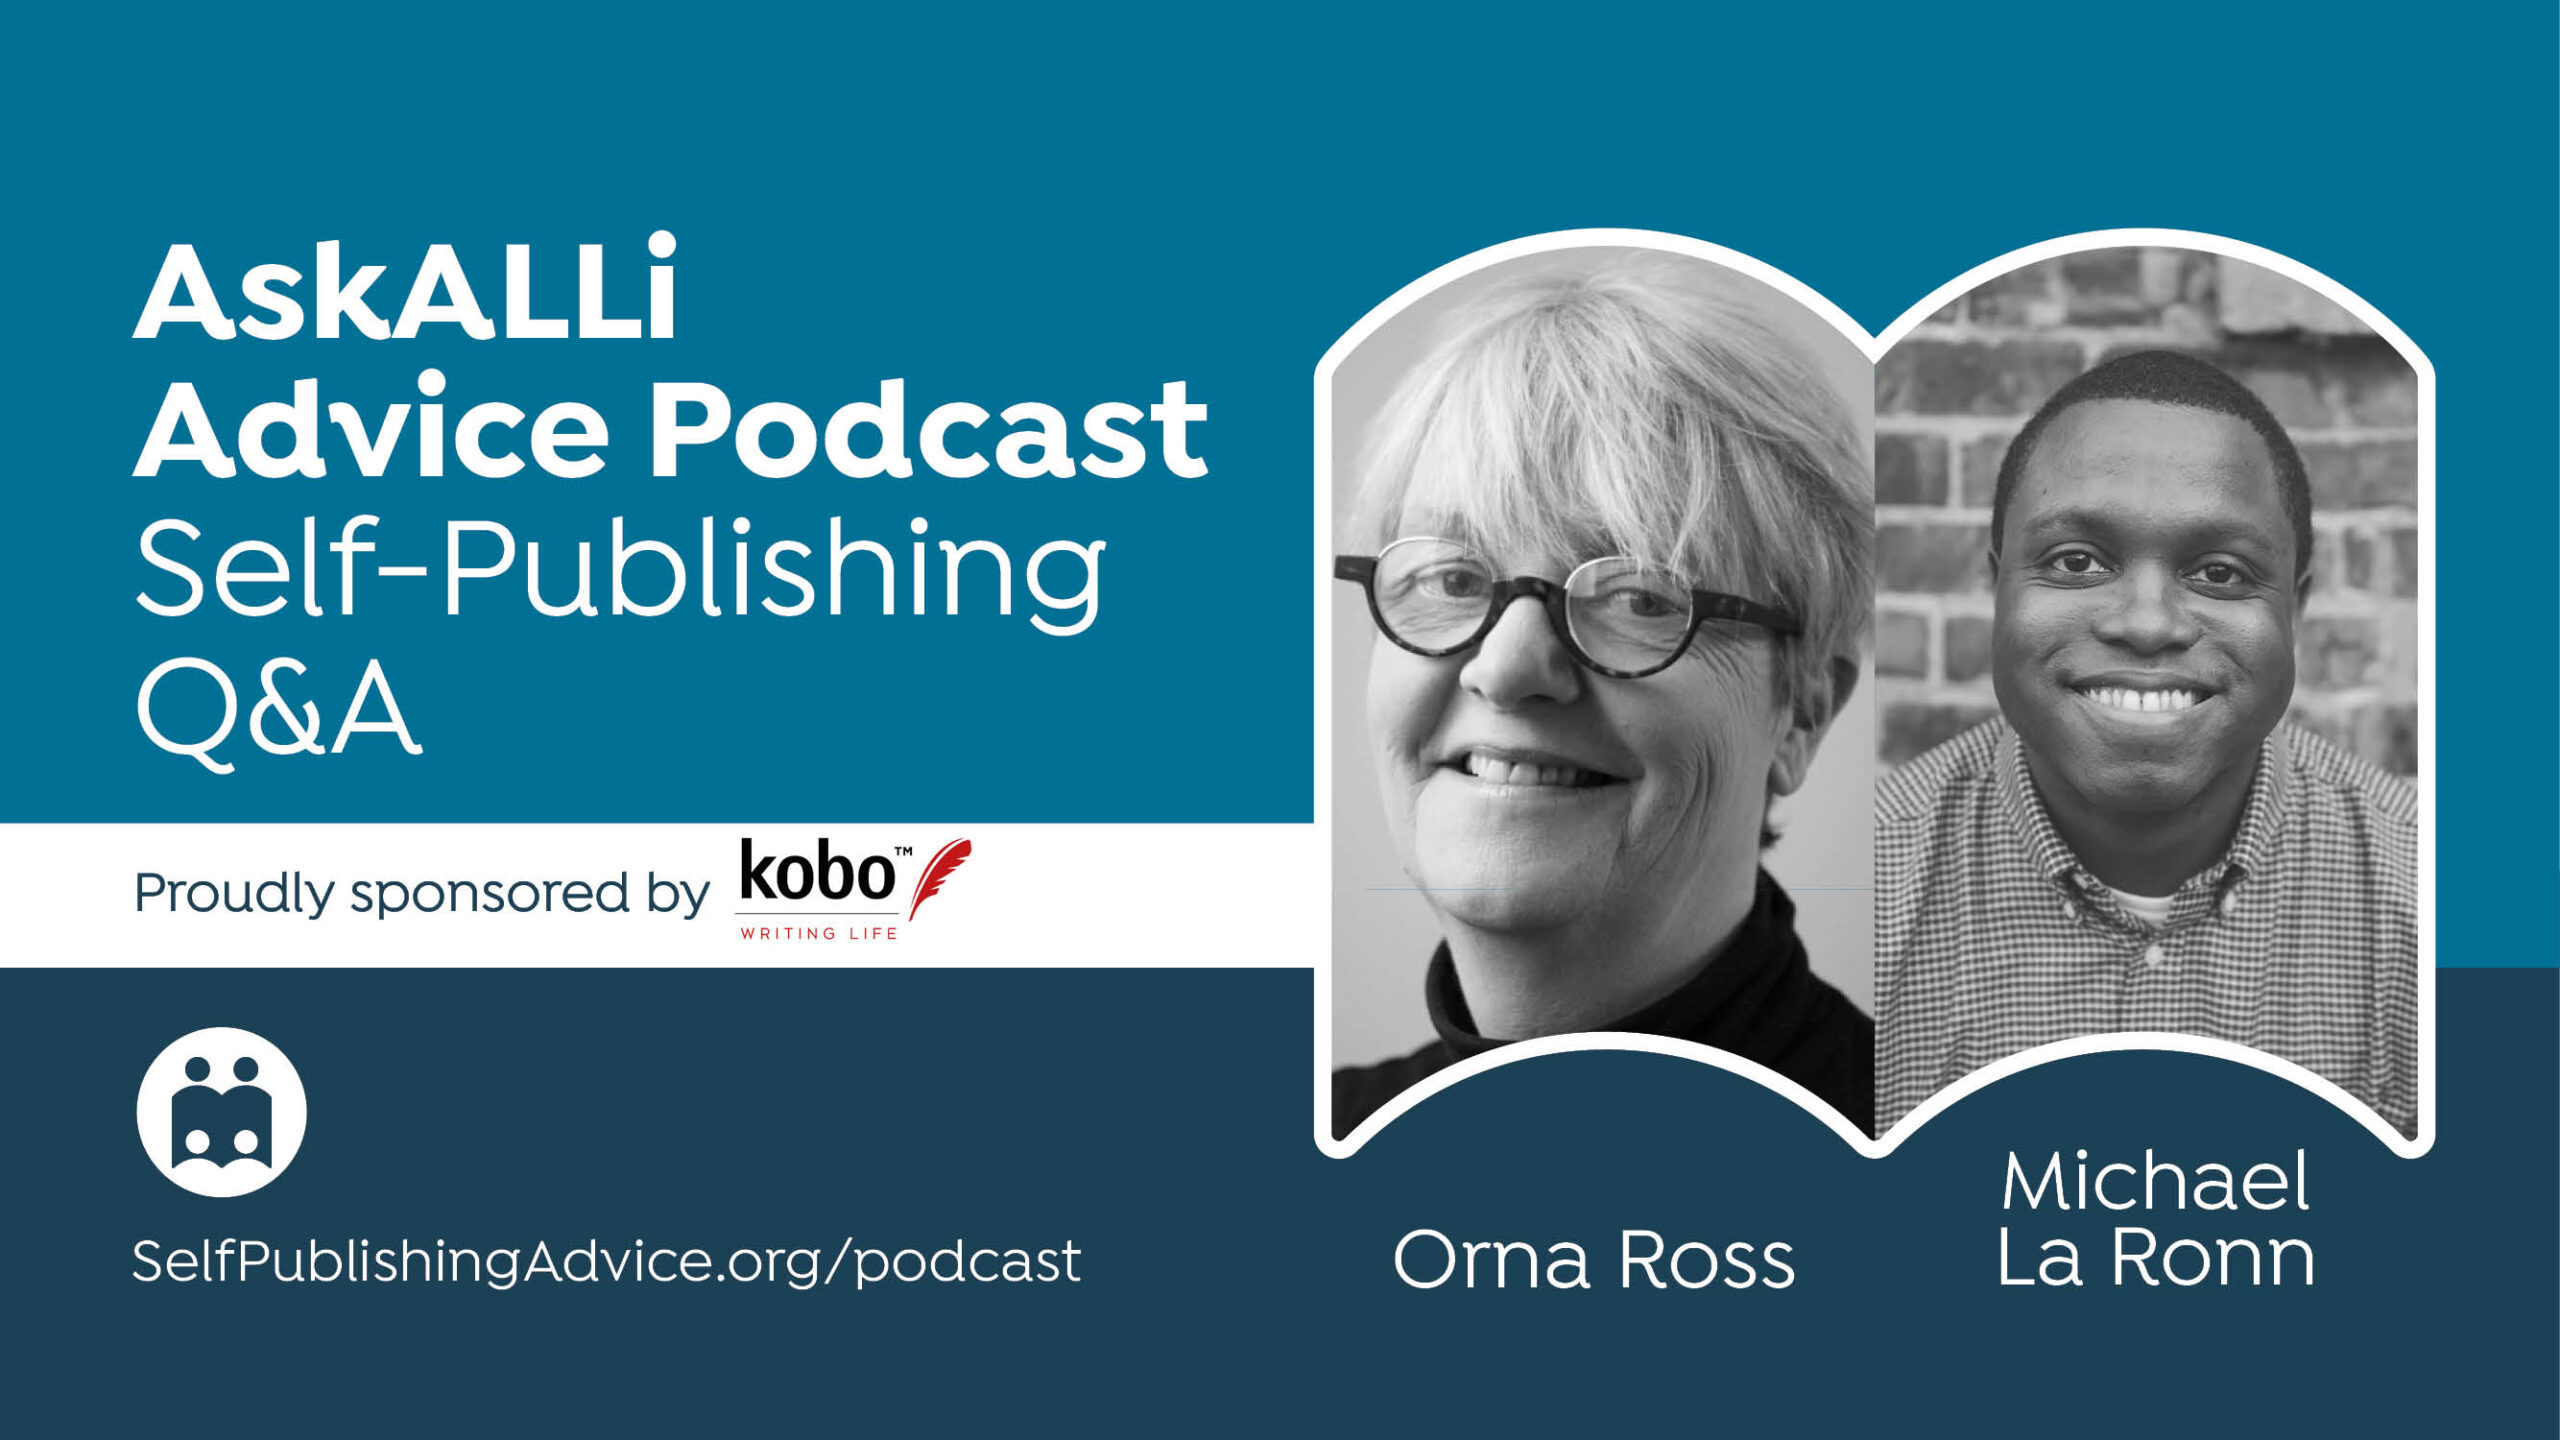 Should I Traditionally Publish My Book? Other Questions Answered By Orna Ross And Michael La Ronn In Our Member Q&A Podcast